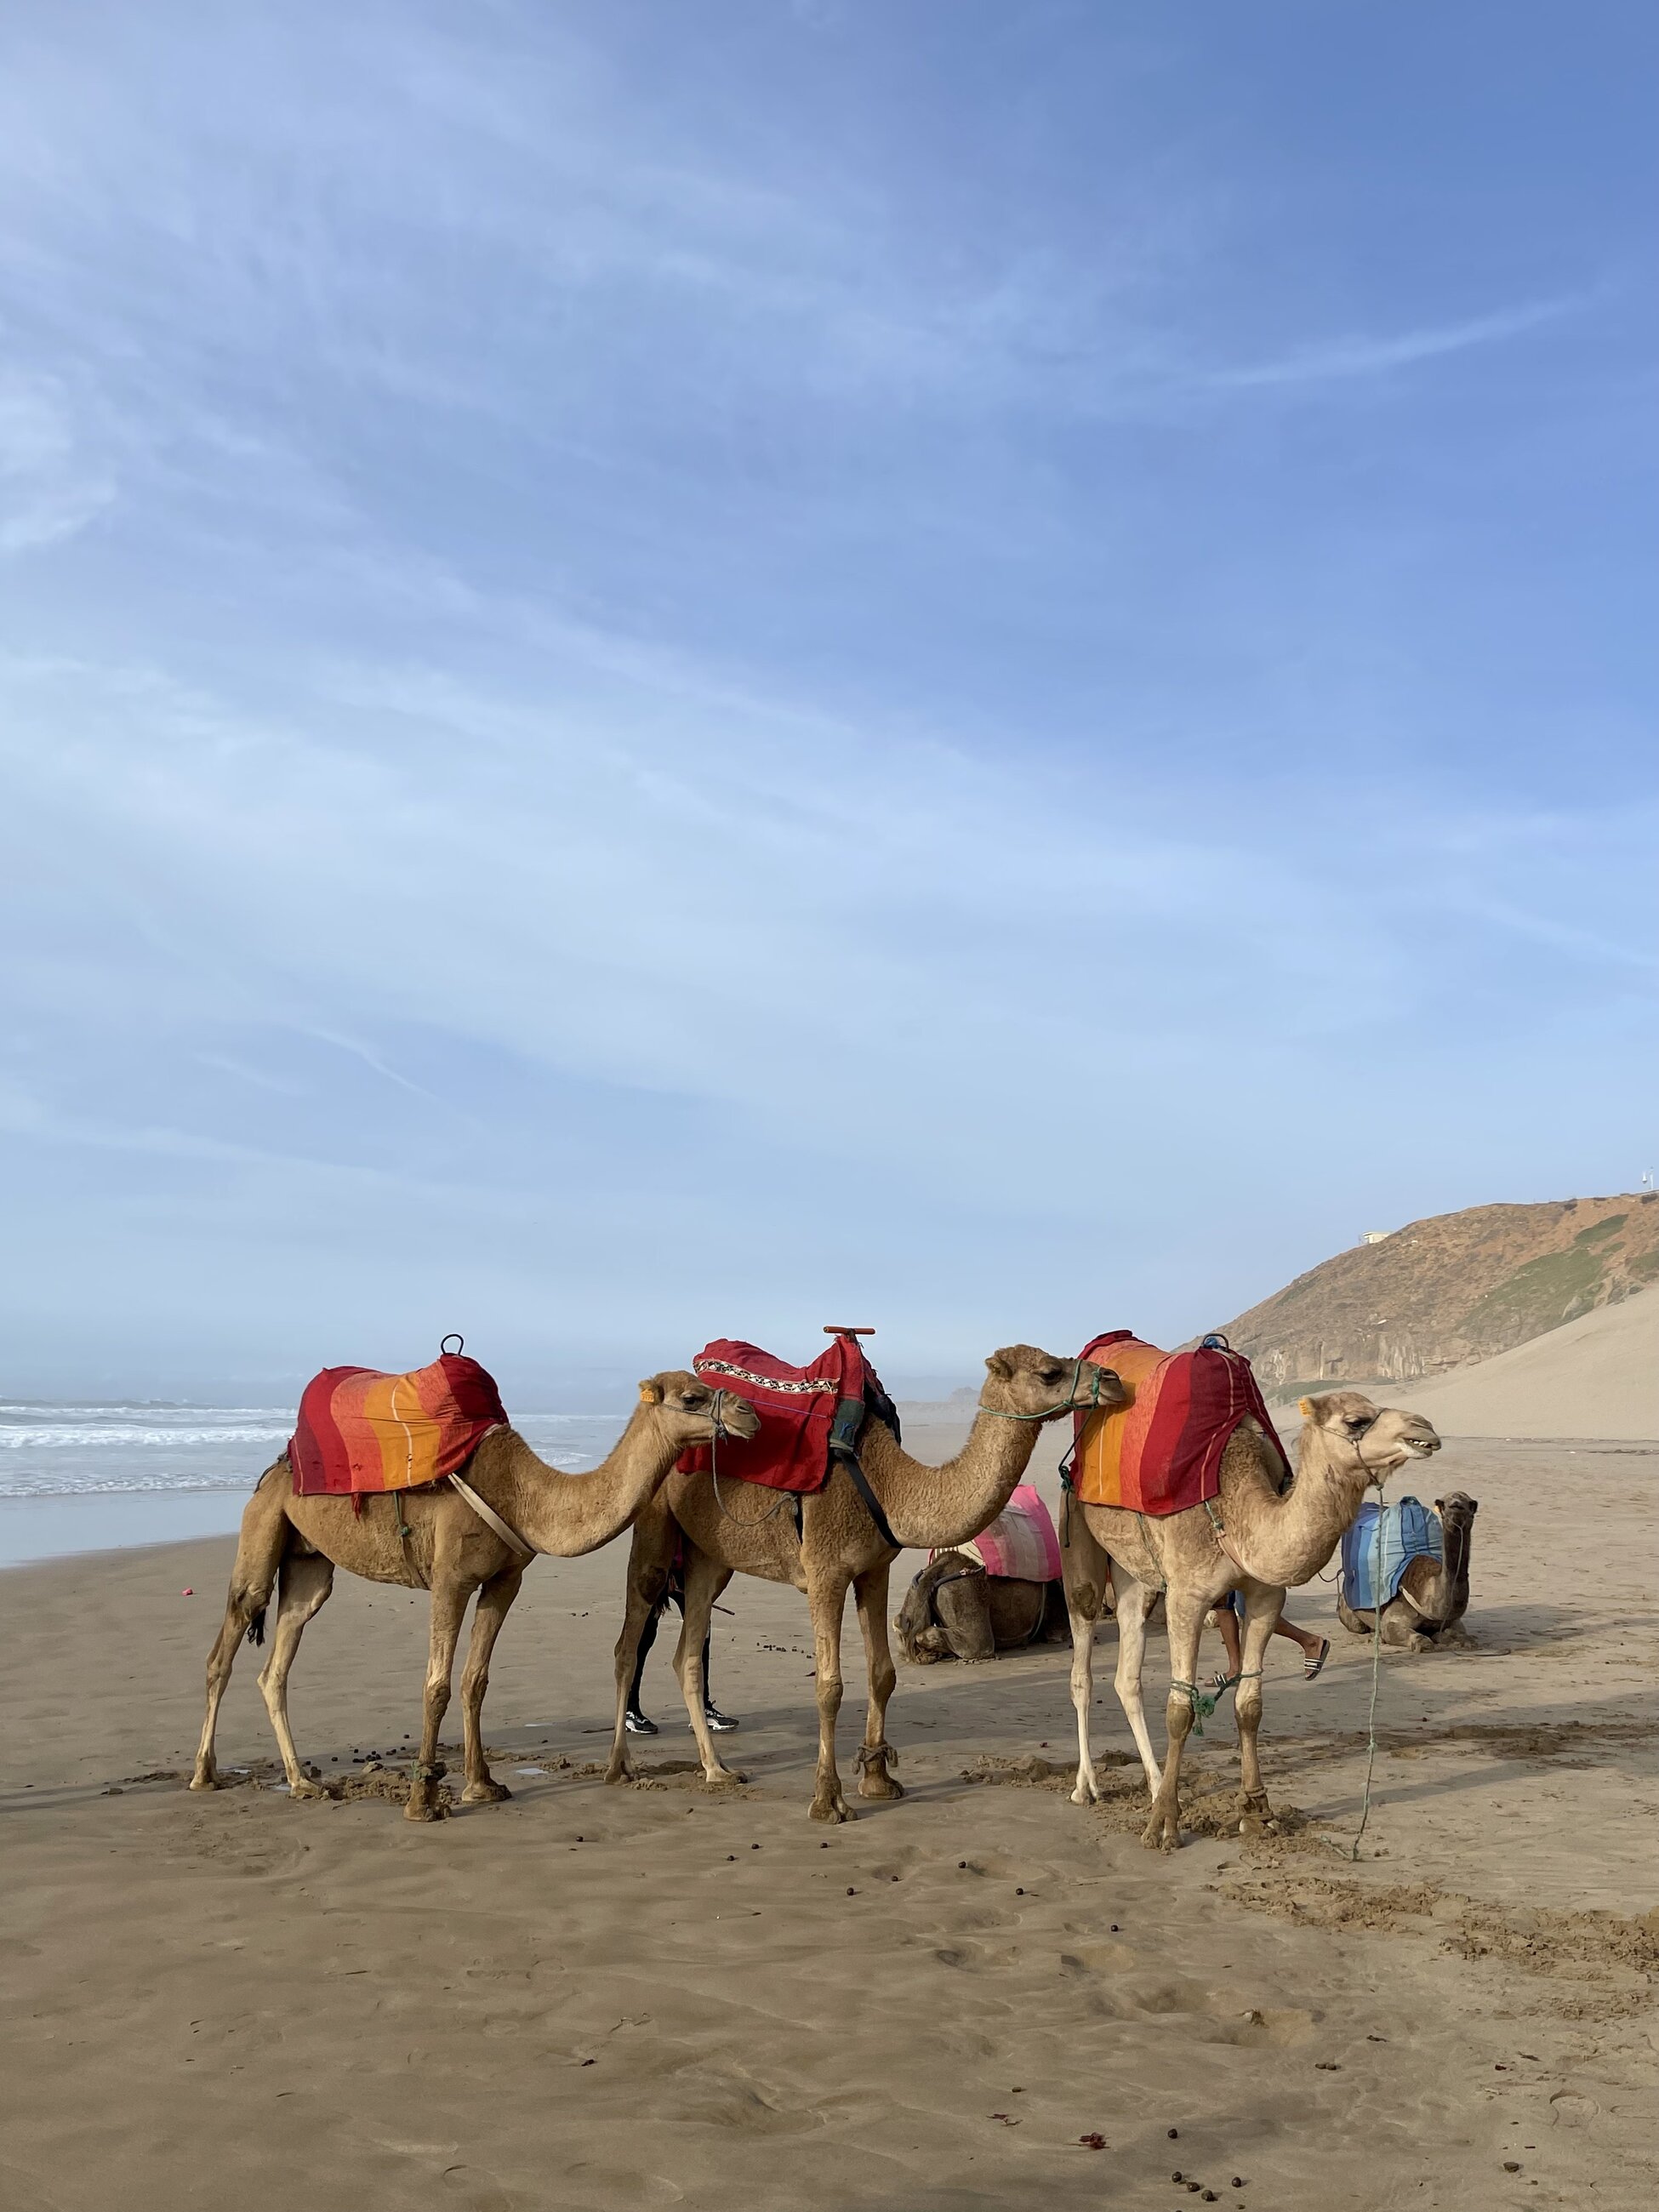 We rode camels in Morocco!